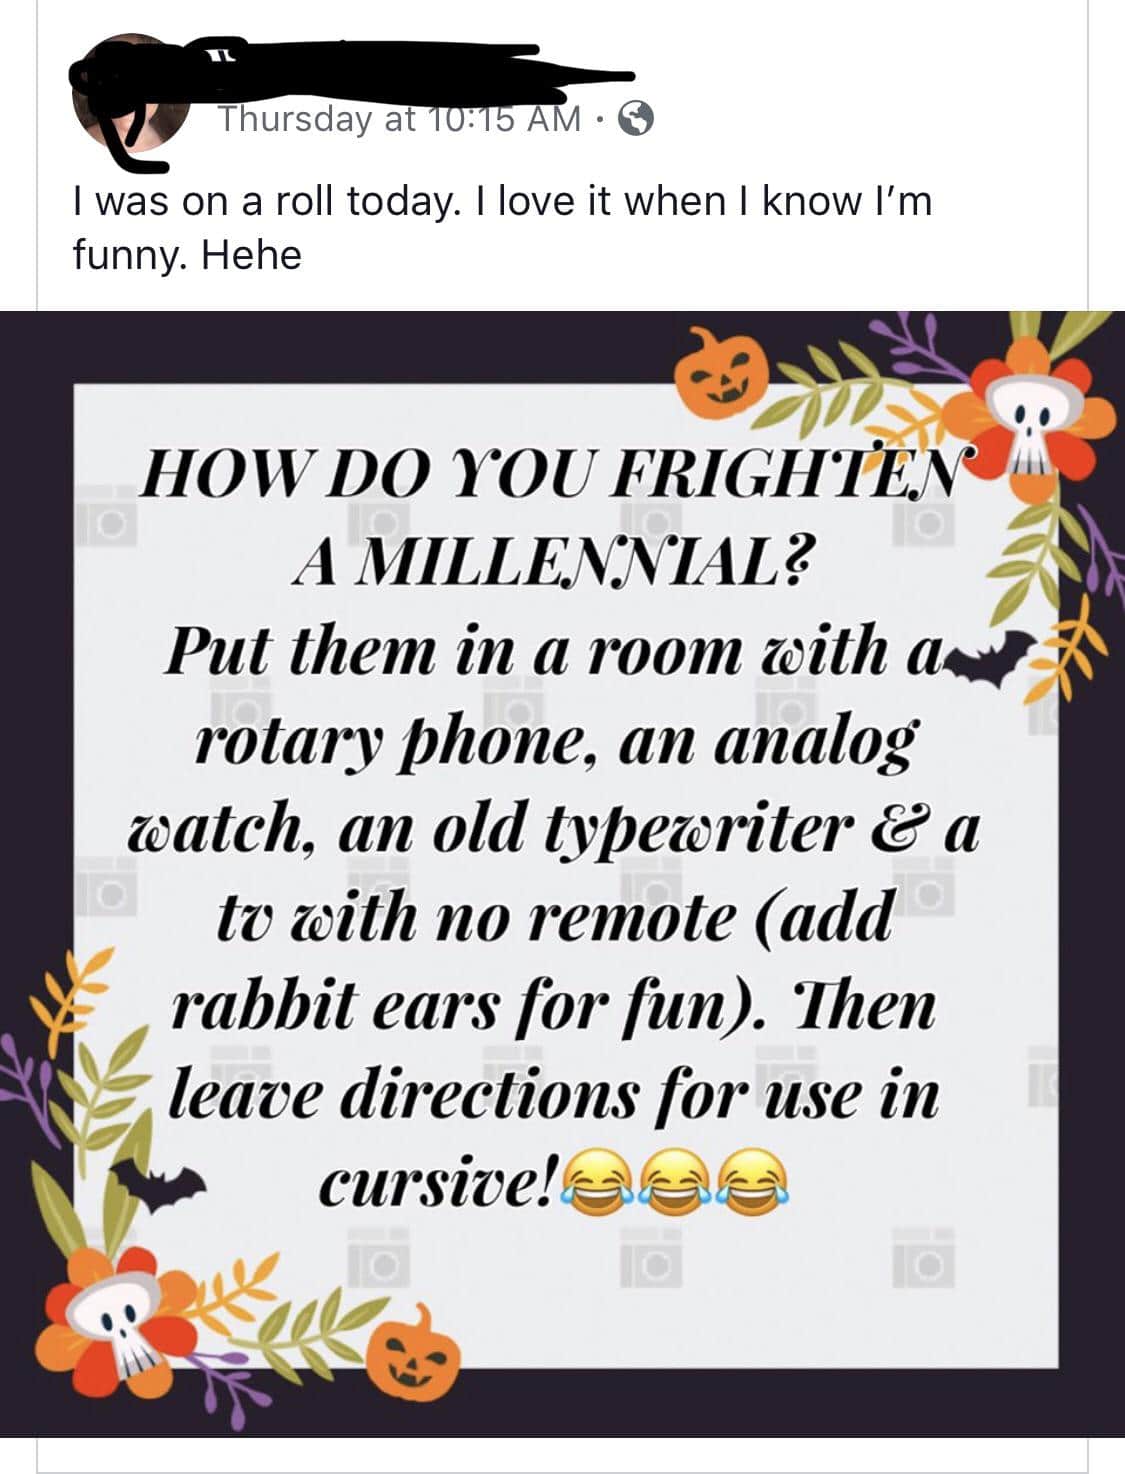 boomer boomer-memes boomer text: Thursday at I was on a roll today. I love it when I know I'm funny. Hehe HOVVDO YOUFRIGII'ITAO! A MILLENNIAL? Put them in a room aith rotary Phone, an analog catch, an old typewriter e a tv cith no remote (add rabbit ears Tor Tun). Then leave directions for use in cursive!eee 